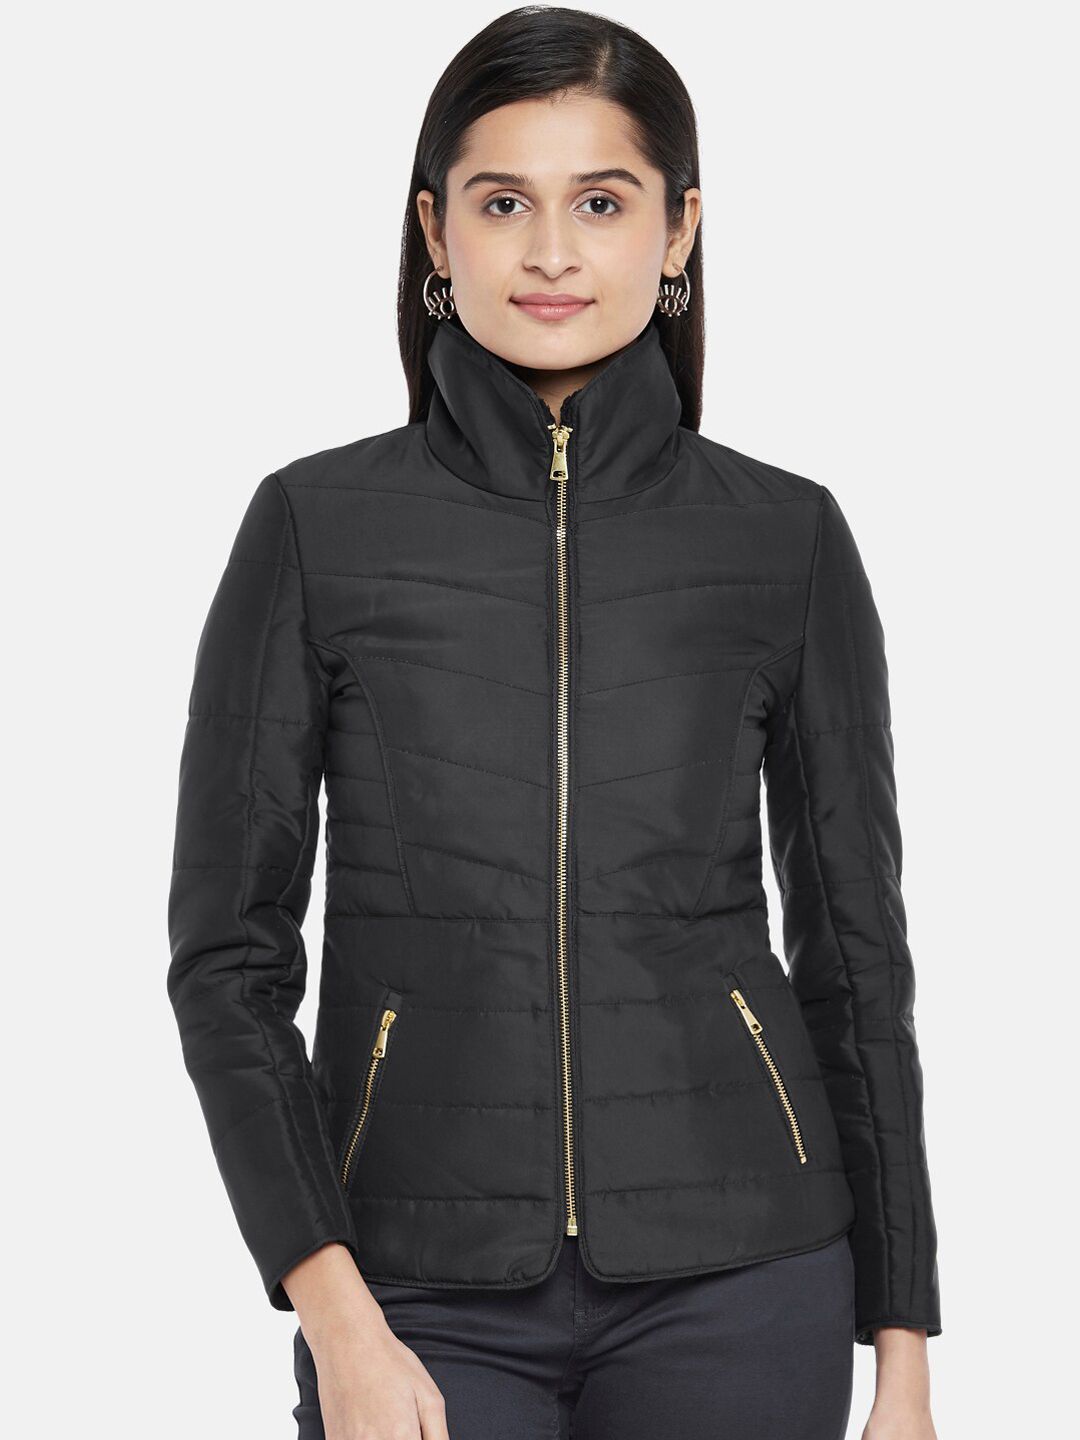 Honey by Pantaloons Women Black Open Front Jacket Price in India